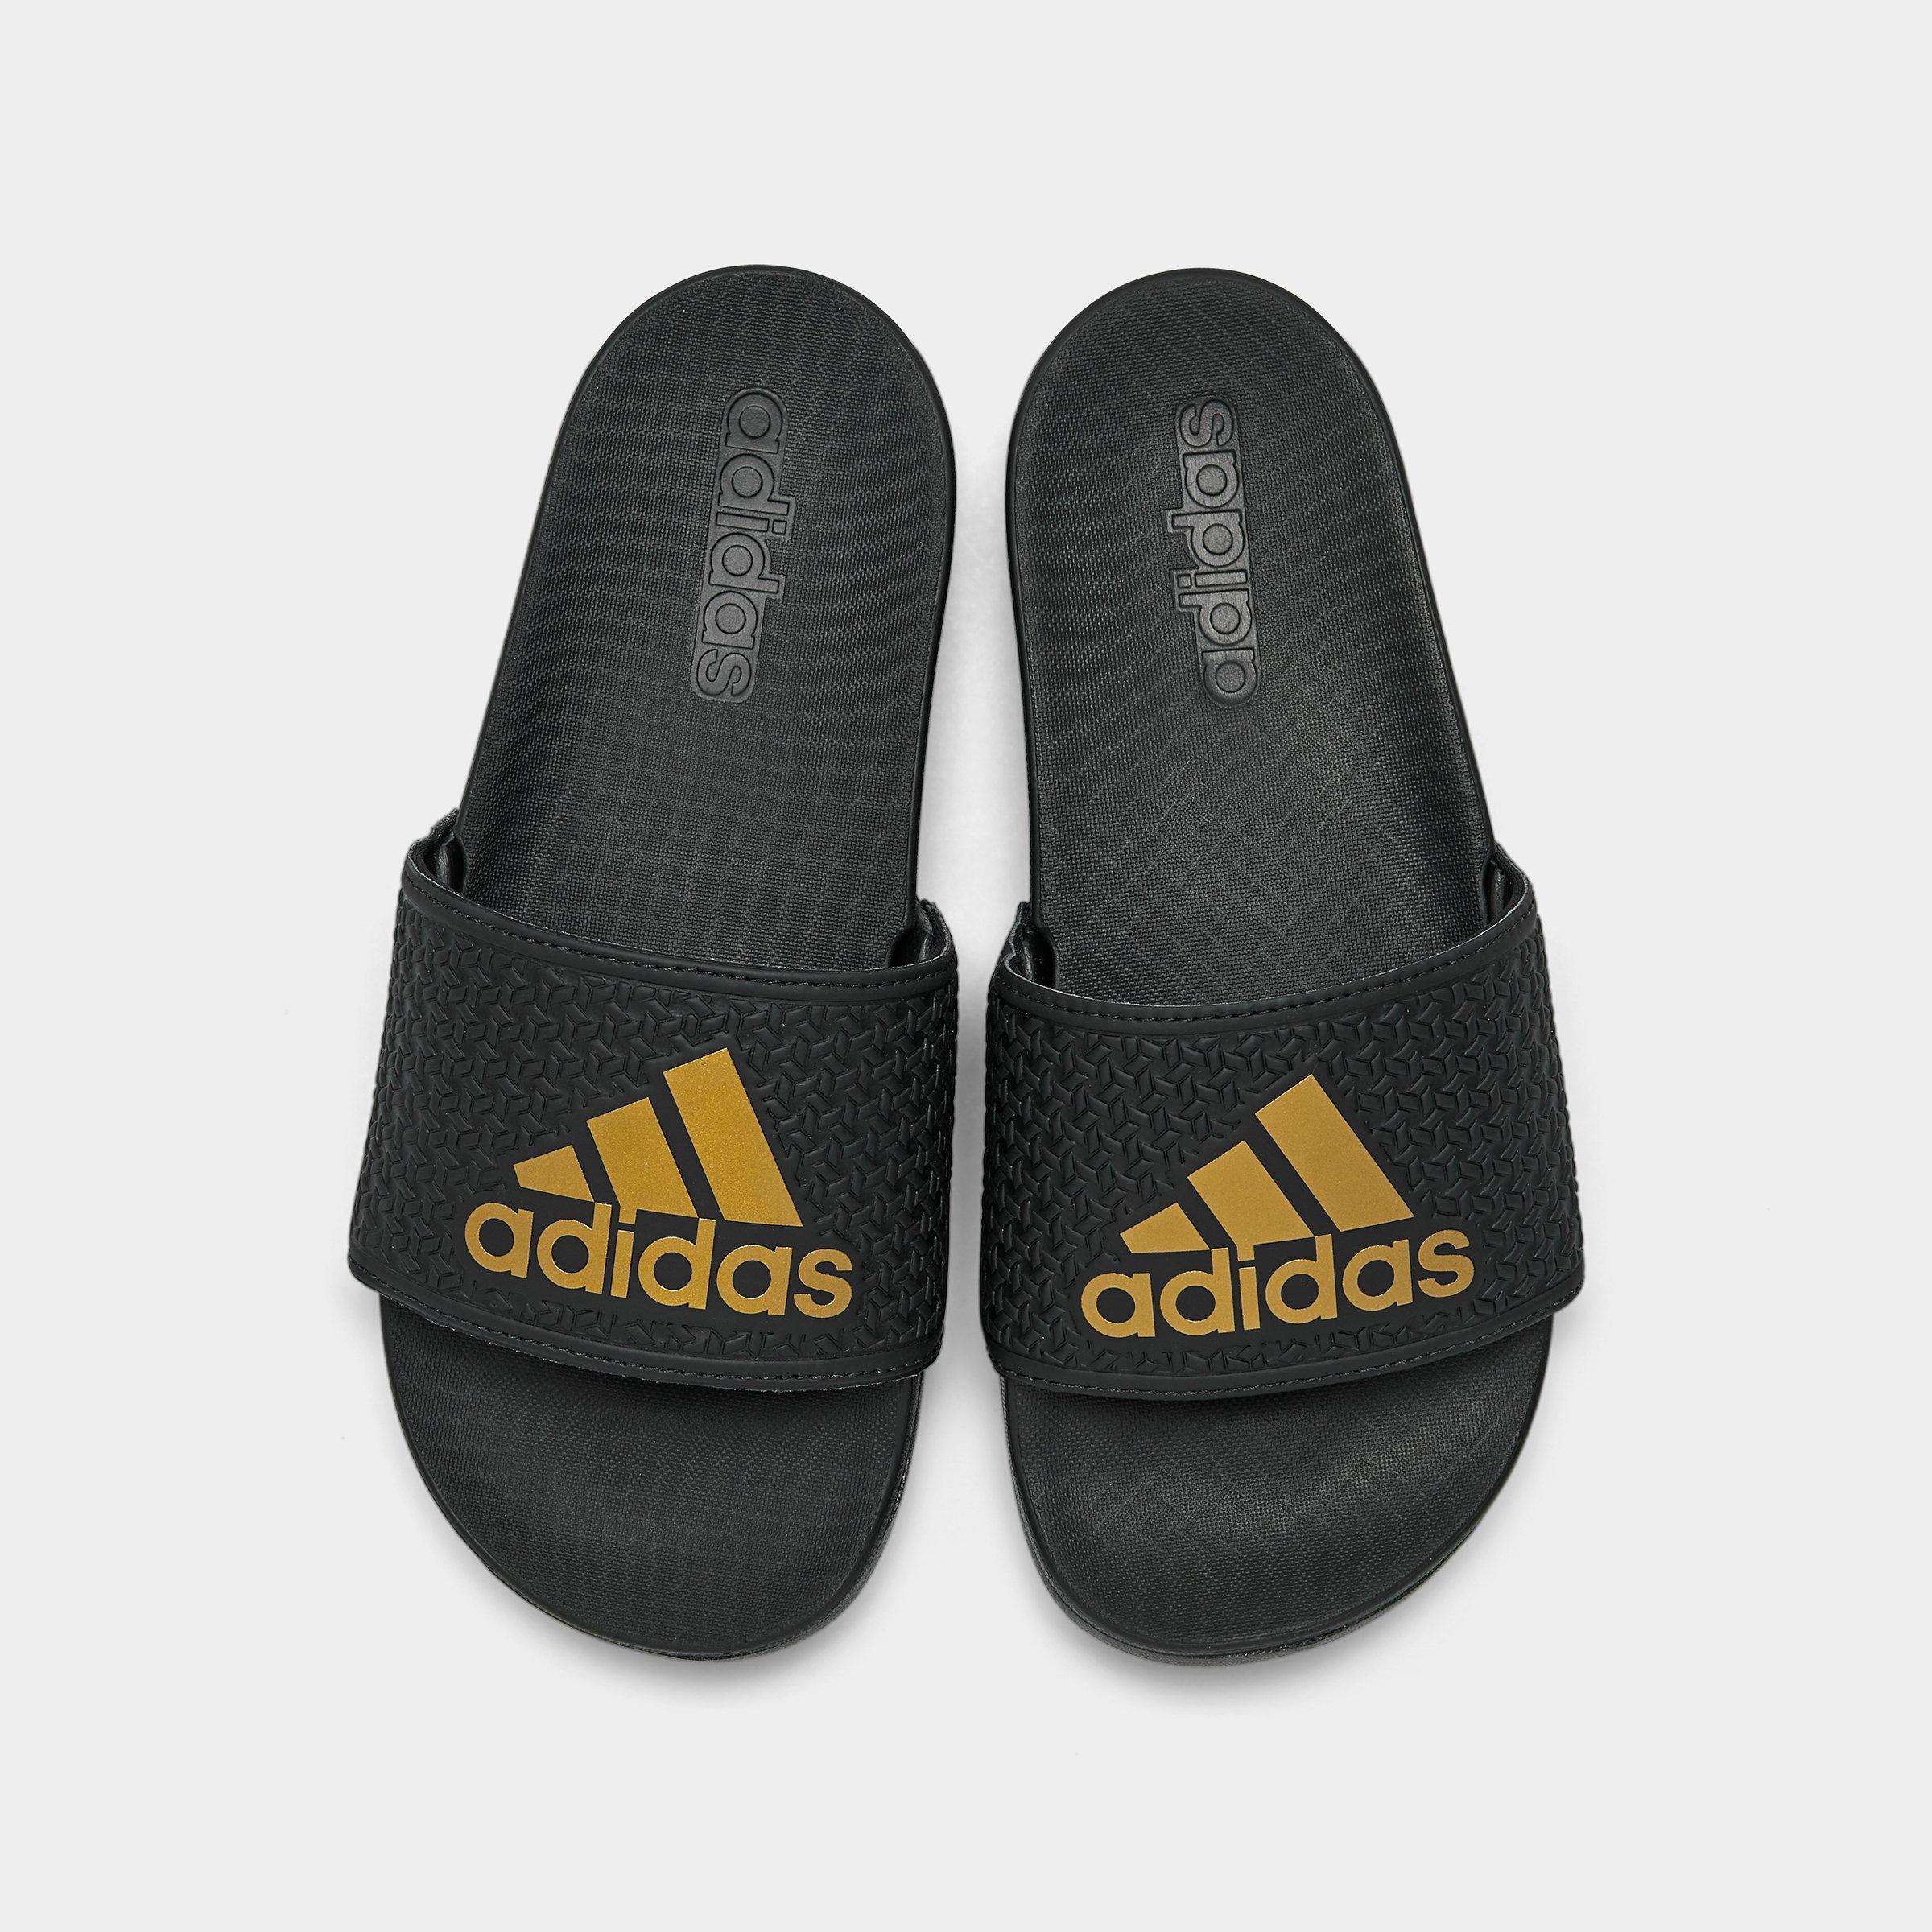 black and gold adidas sandals